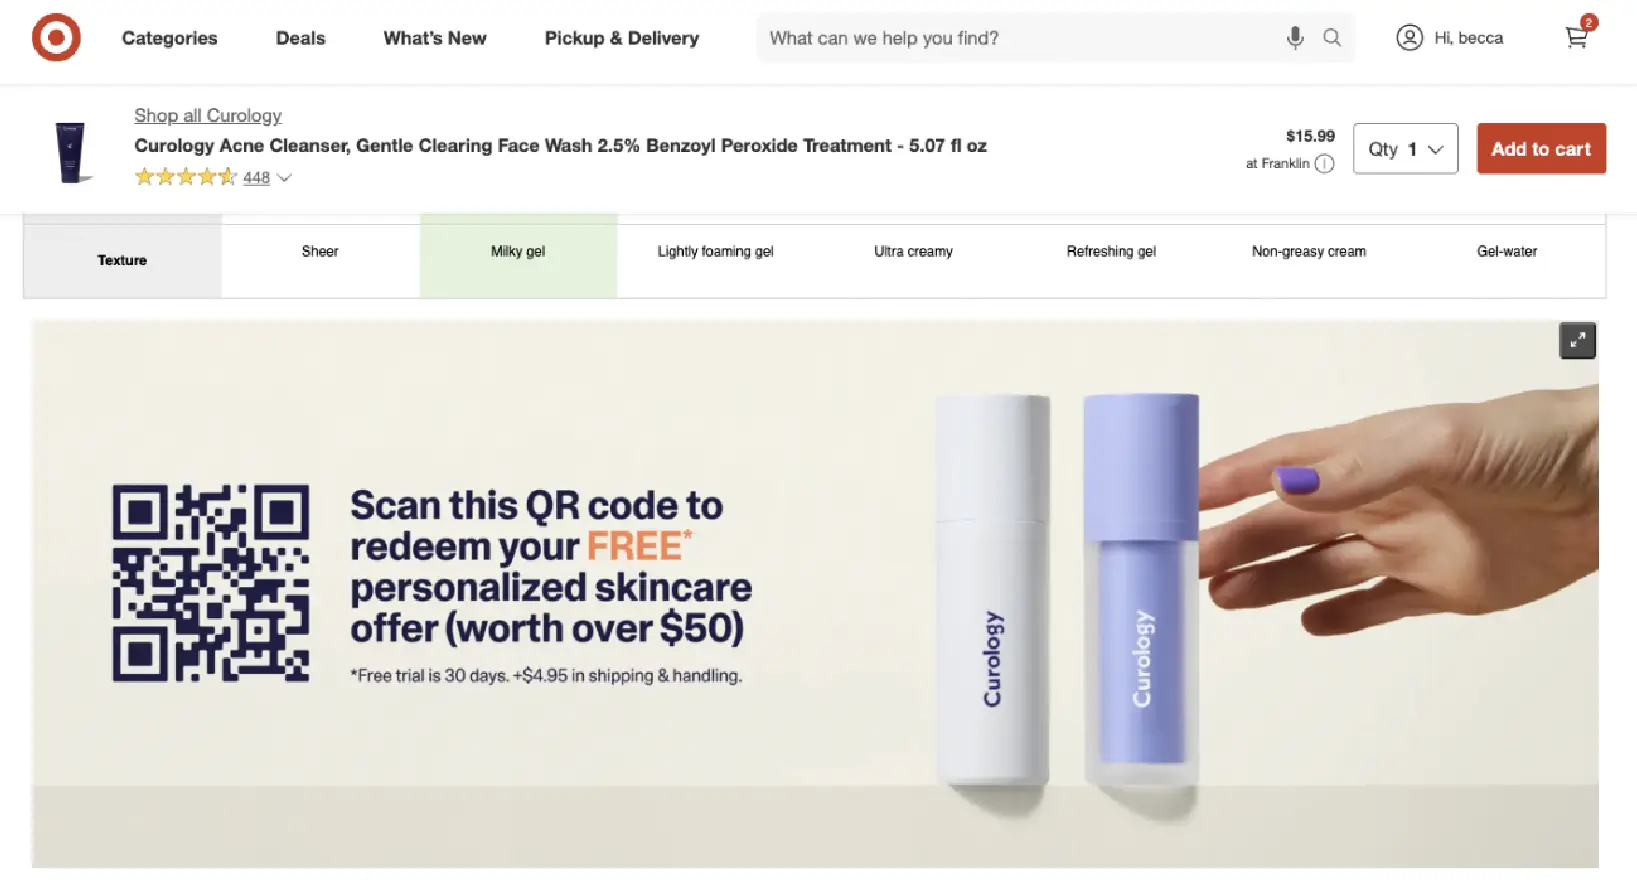 Image on Target.com's website showcasing Curology's offer to scan a QR Code and redeem a personalized skincare offer.